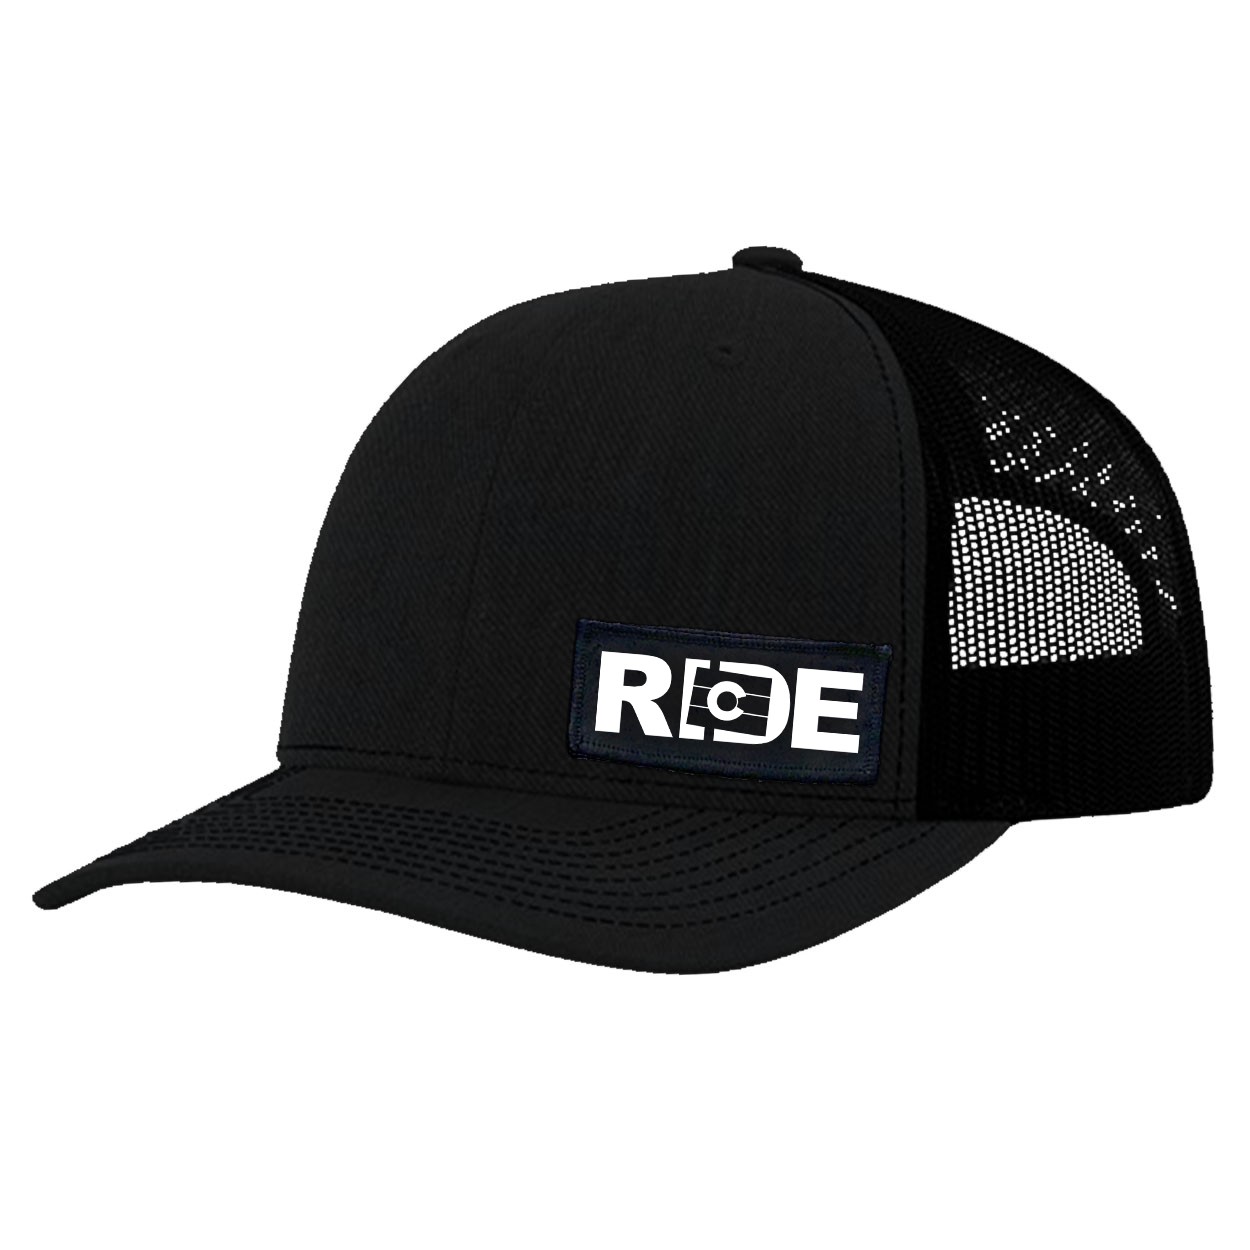 Ride Colorado Night Out Youth Patch Mesh Snapback Hat Black (White Logo)